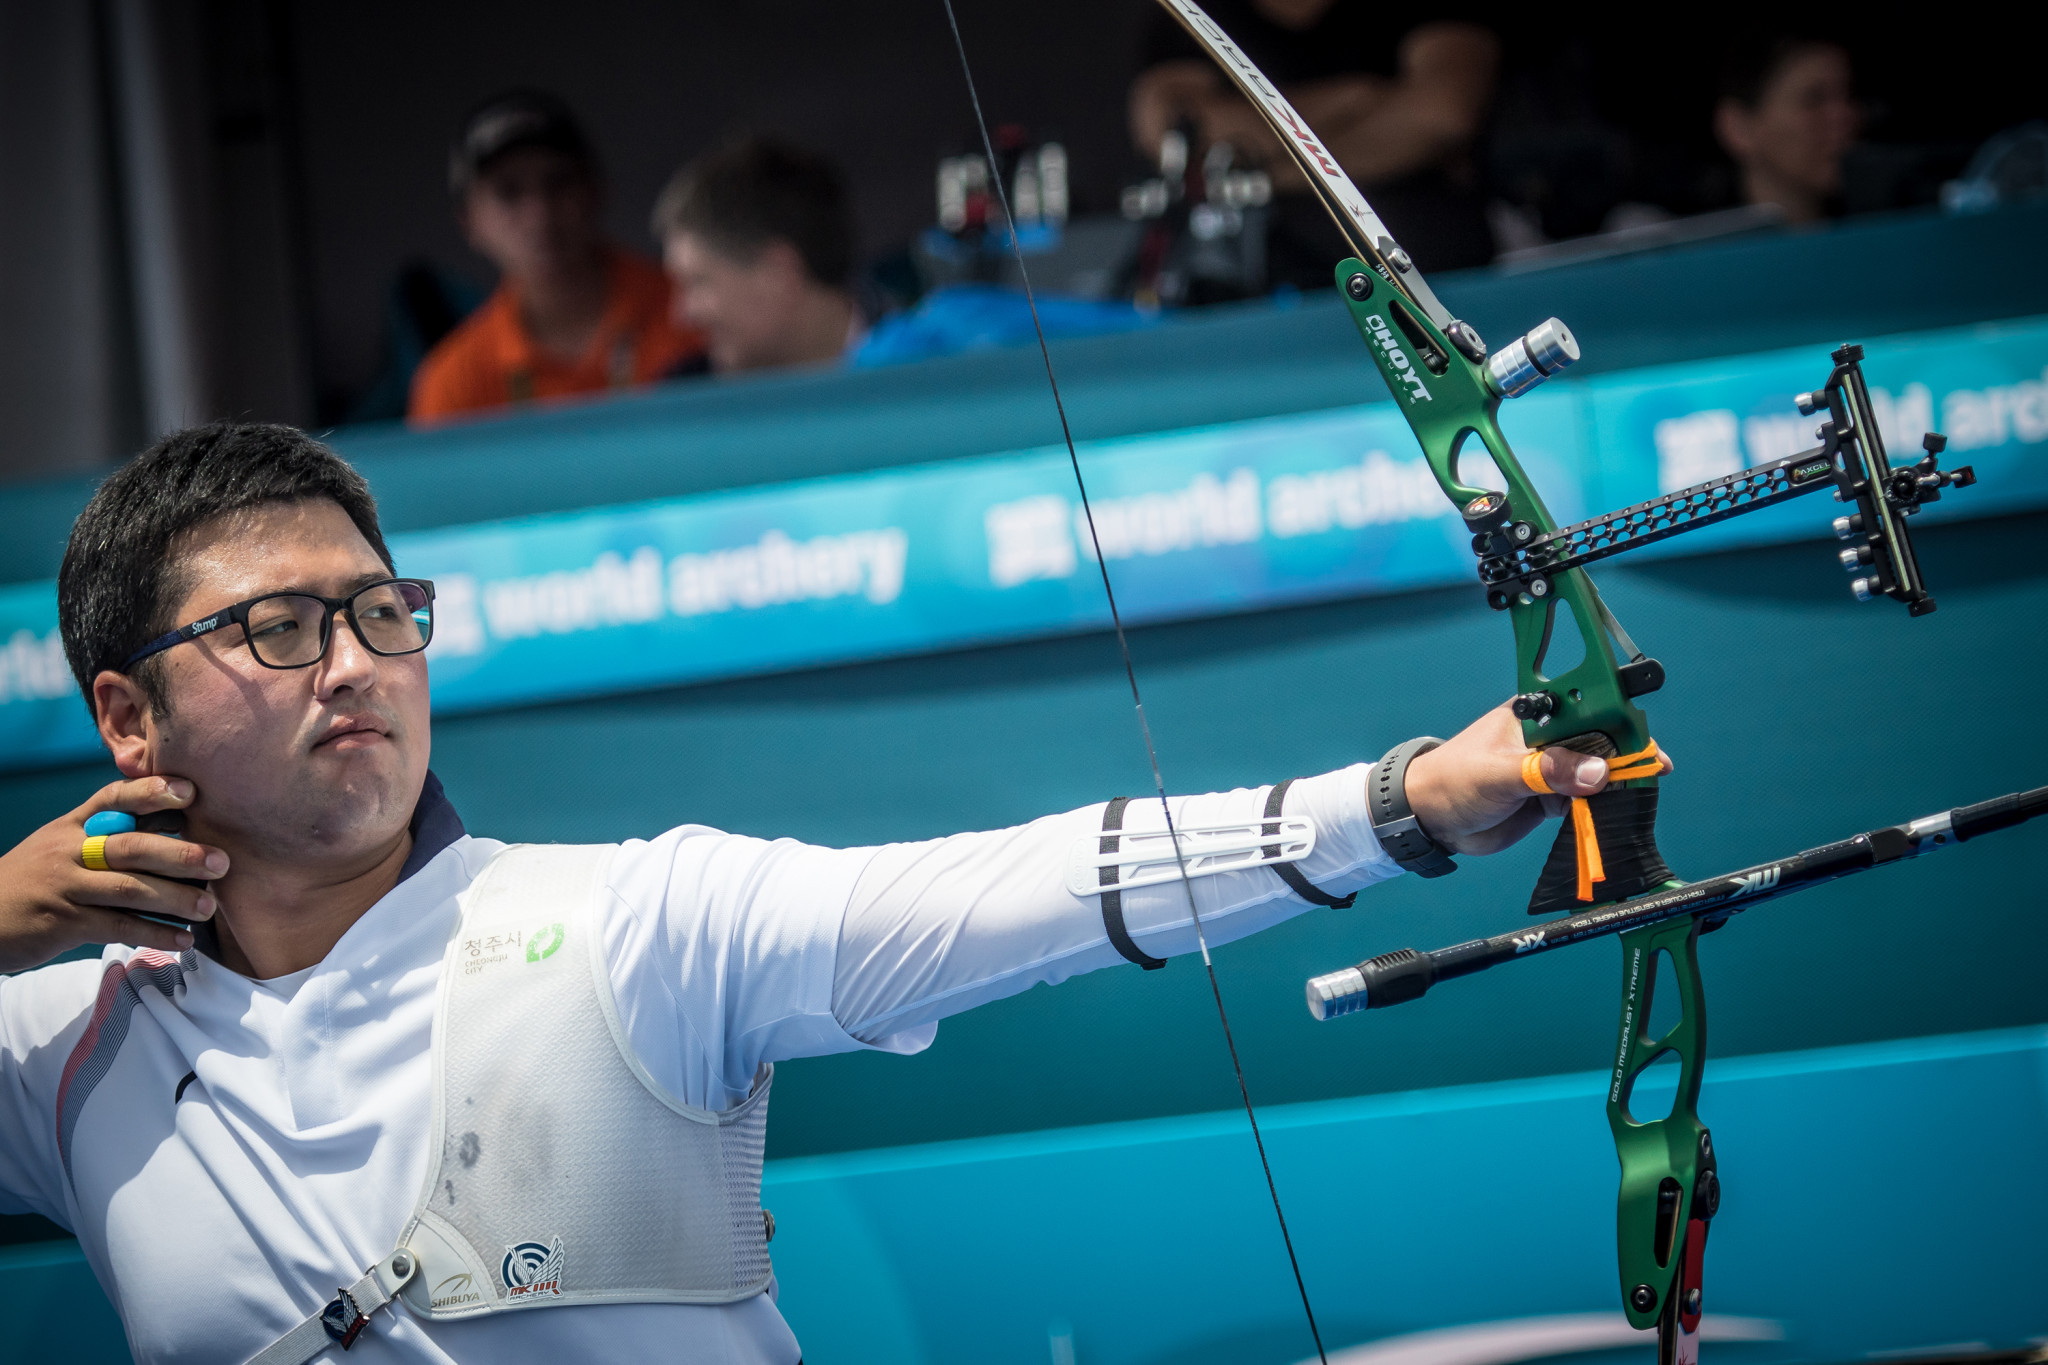 Olympic gold medallist Kim Woo-jin defeated returning Australian David Barnes in the second round of the men's recurve at the Archery World Cup in Berlin ©Getty Images